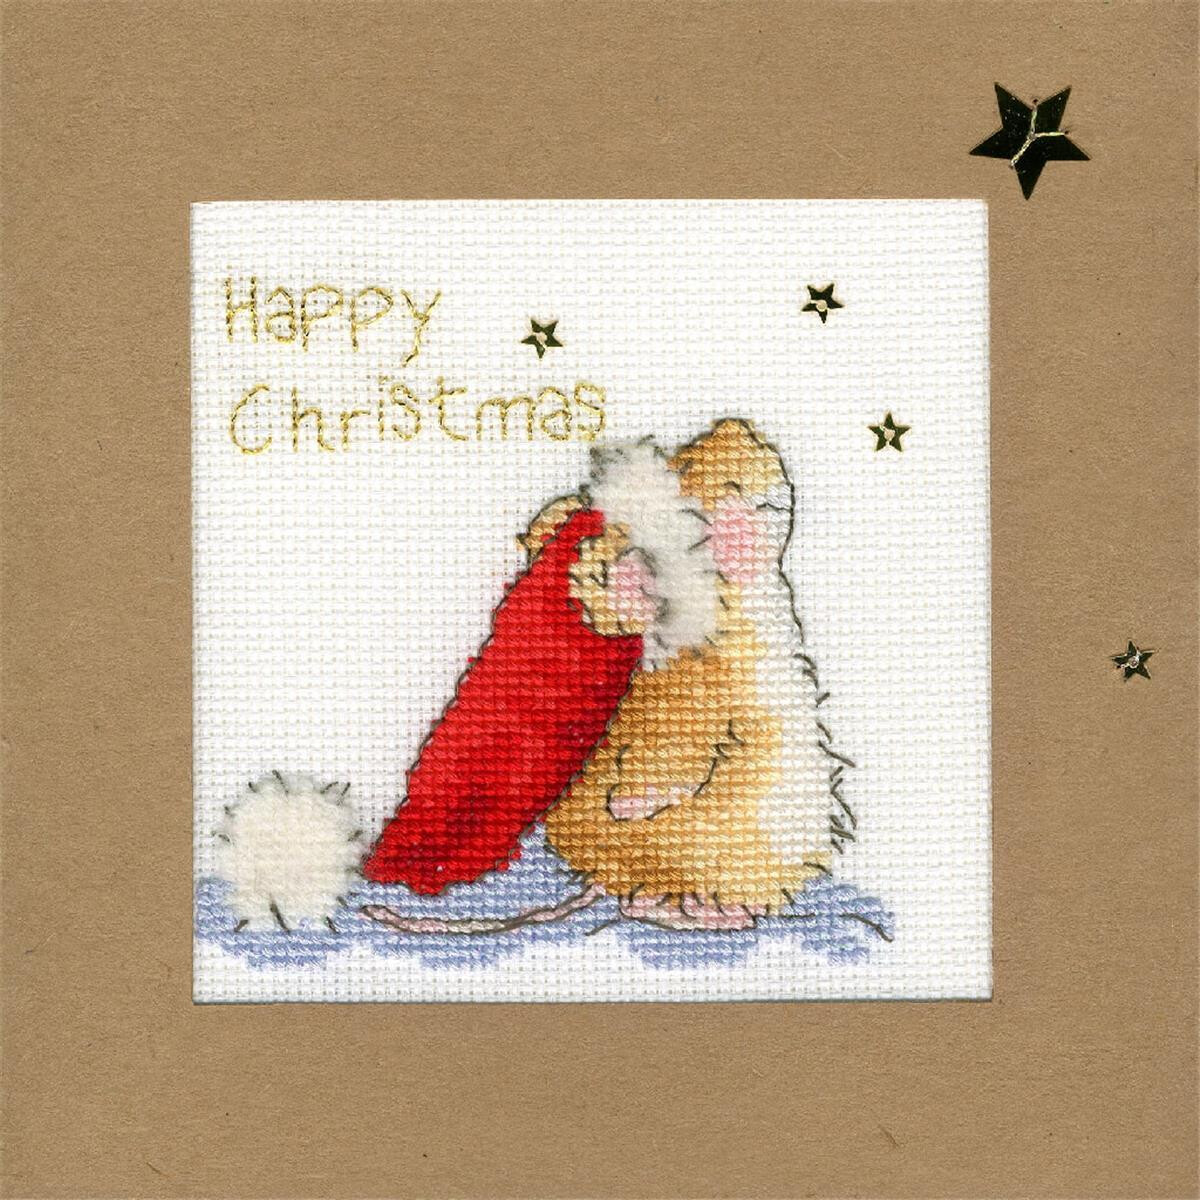 A Christmas card depicts two mice standing and facing...